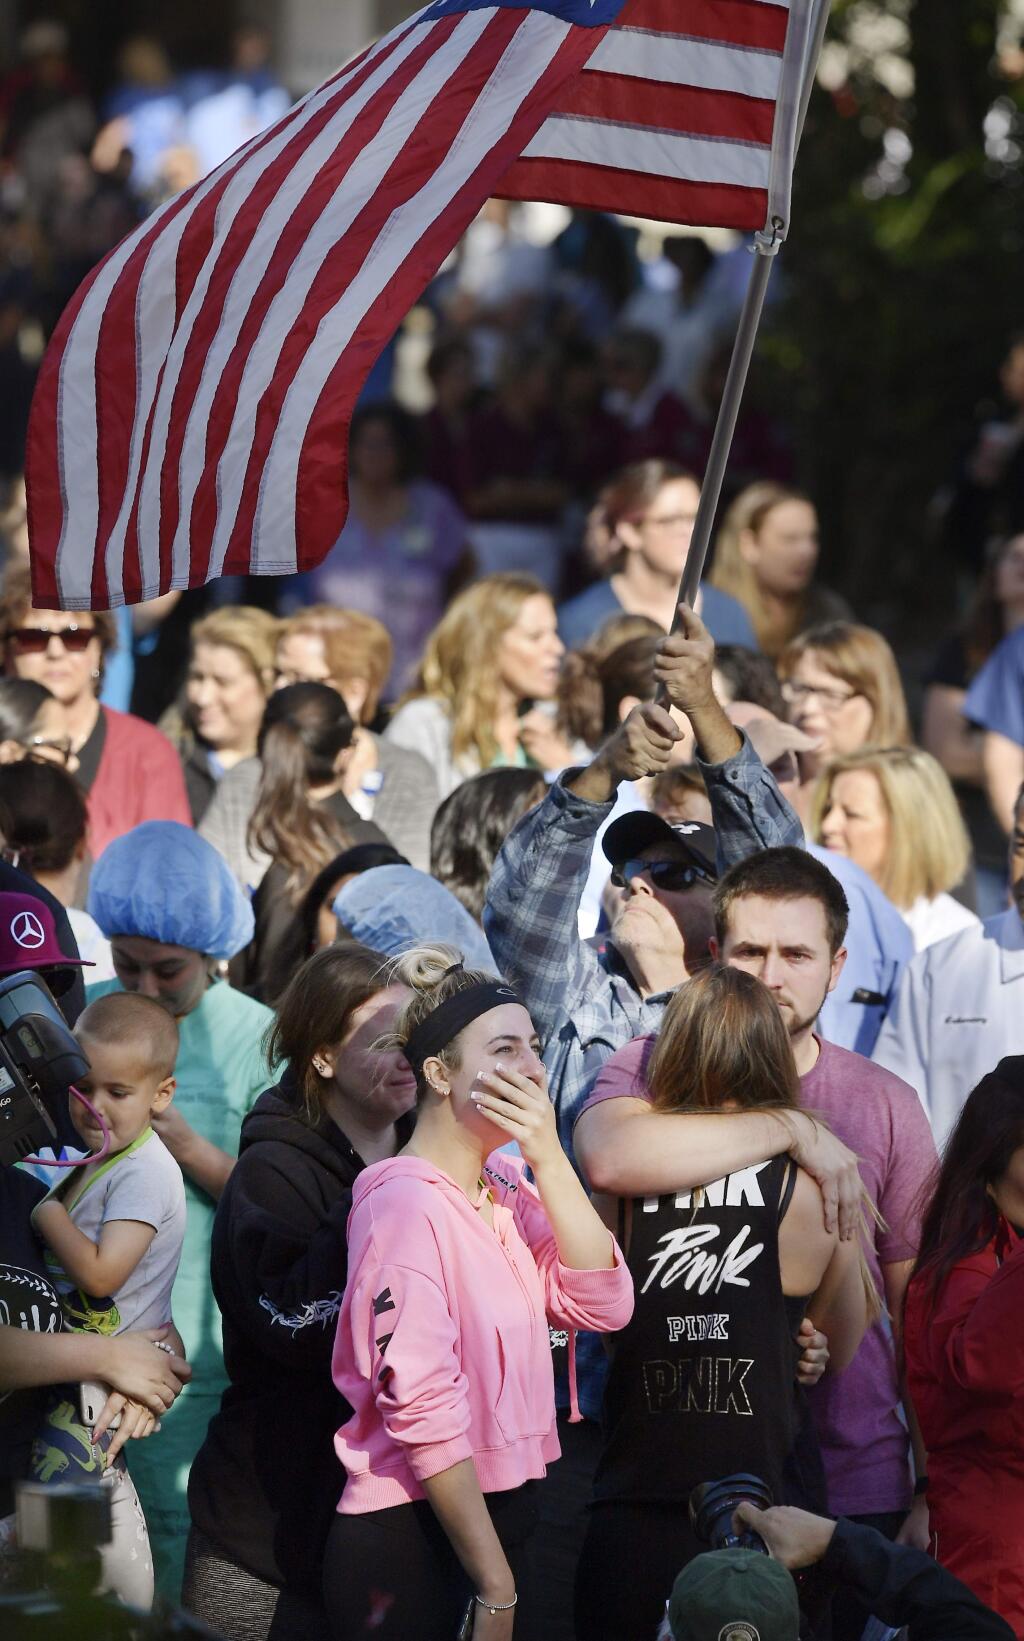 People cry as a law enforcement motorcade escorts the body of Ventura County Sheriff's Department Sgt. Ron Helus from the Los Robles Regional Medical Center Thursday, Nov. 8, 2018, in Thousand Oaks, Calif., after a gunman opened fire Wednesday evening inside a country music bar, killing multiple people including Helus. (AP Photo/Mark J. Terrill)